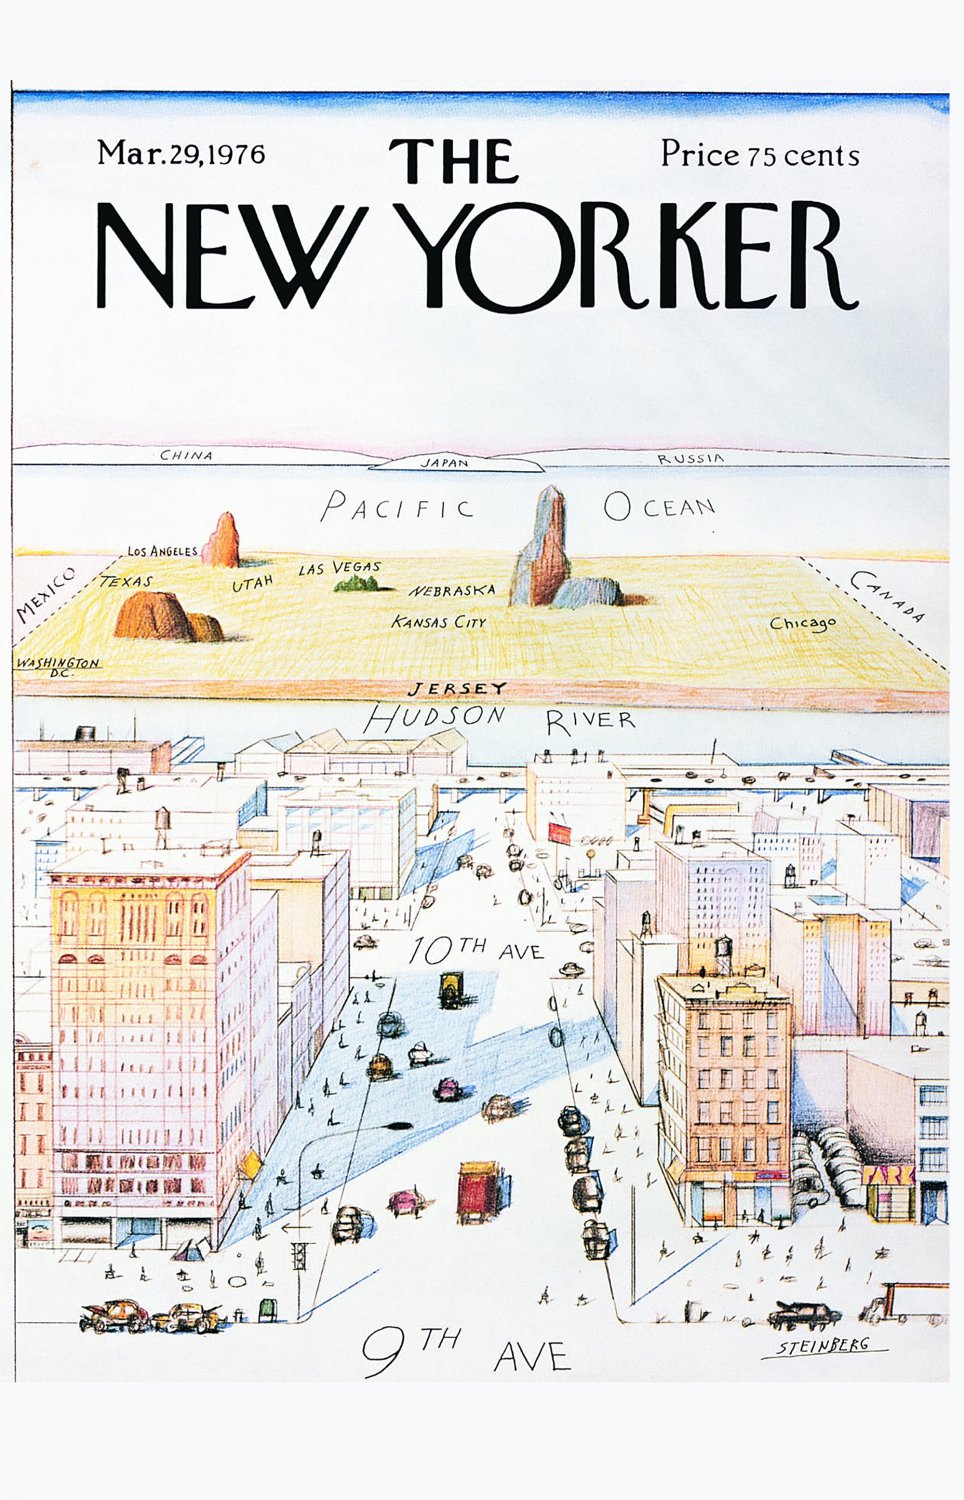 The New Yorker 1976  18"x28" (45cm/70cm) Poster